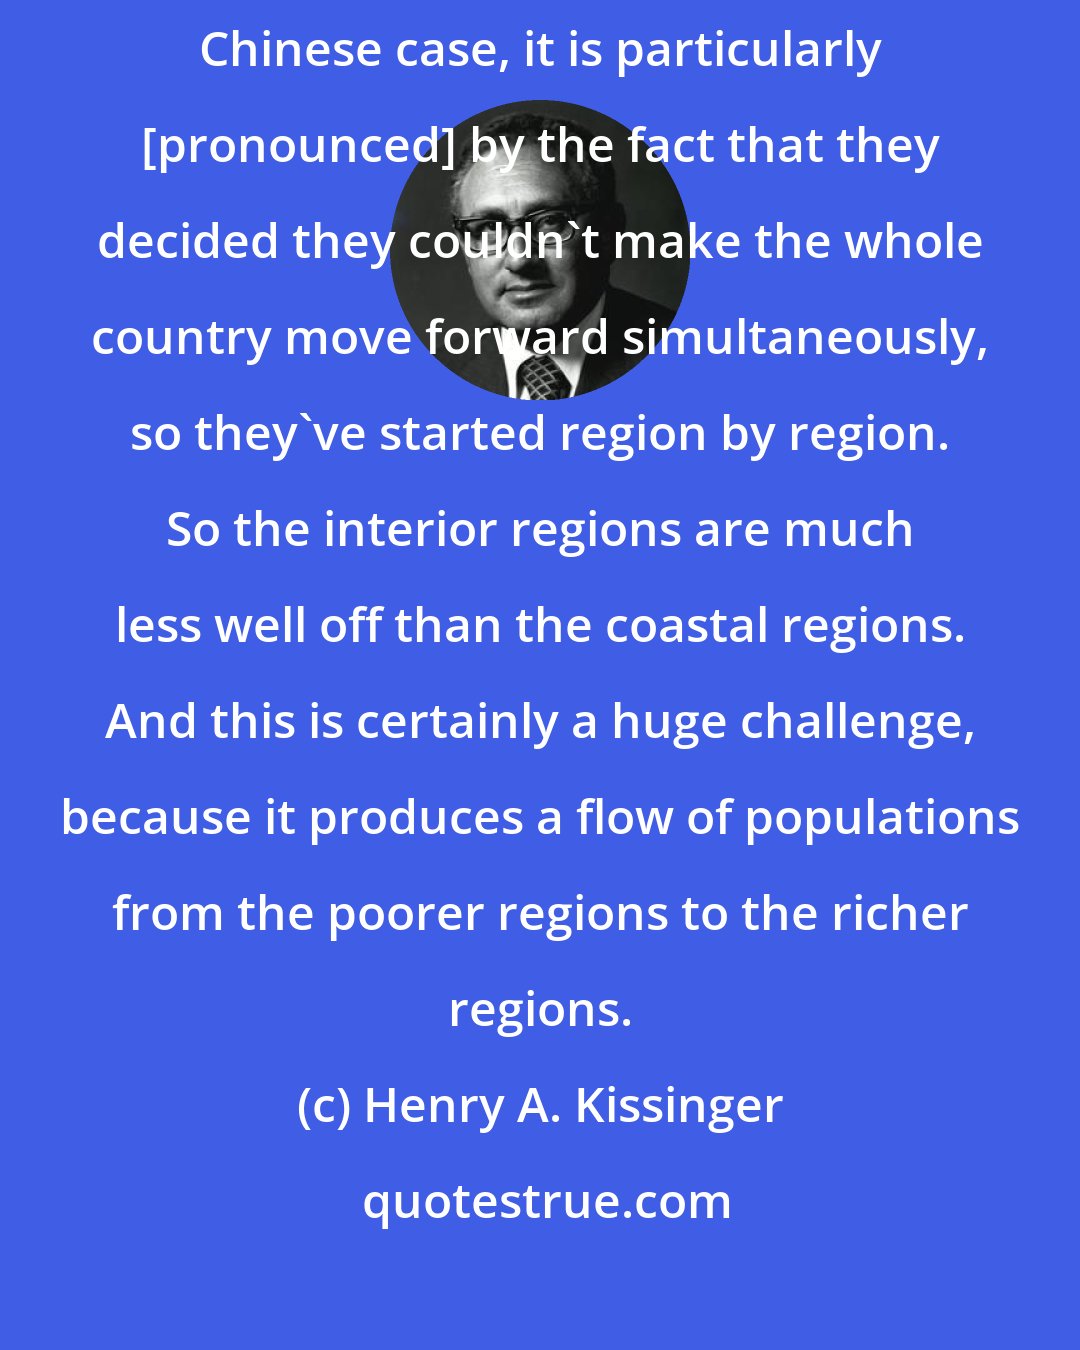 Henry A. Kissinger: Like any developing country, it has an inequality of wealth. In the Chinese case, it is particularly [pronounced] by the fact that they decided they couldn't make the whole country move forward simultaneously, so they've started region by region. So the interior regions are much less well off than the coastal regions. And this is certainly a huge challenge, because it produces a flow of populations from the poorer regions to the richer regions.